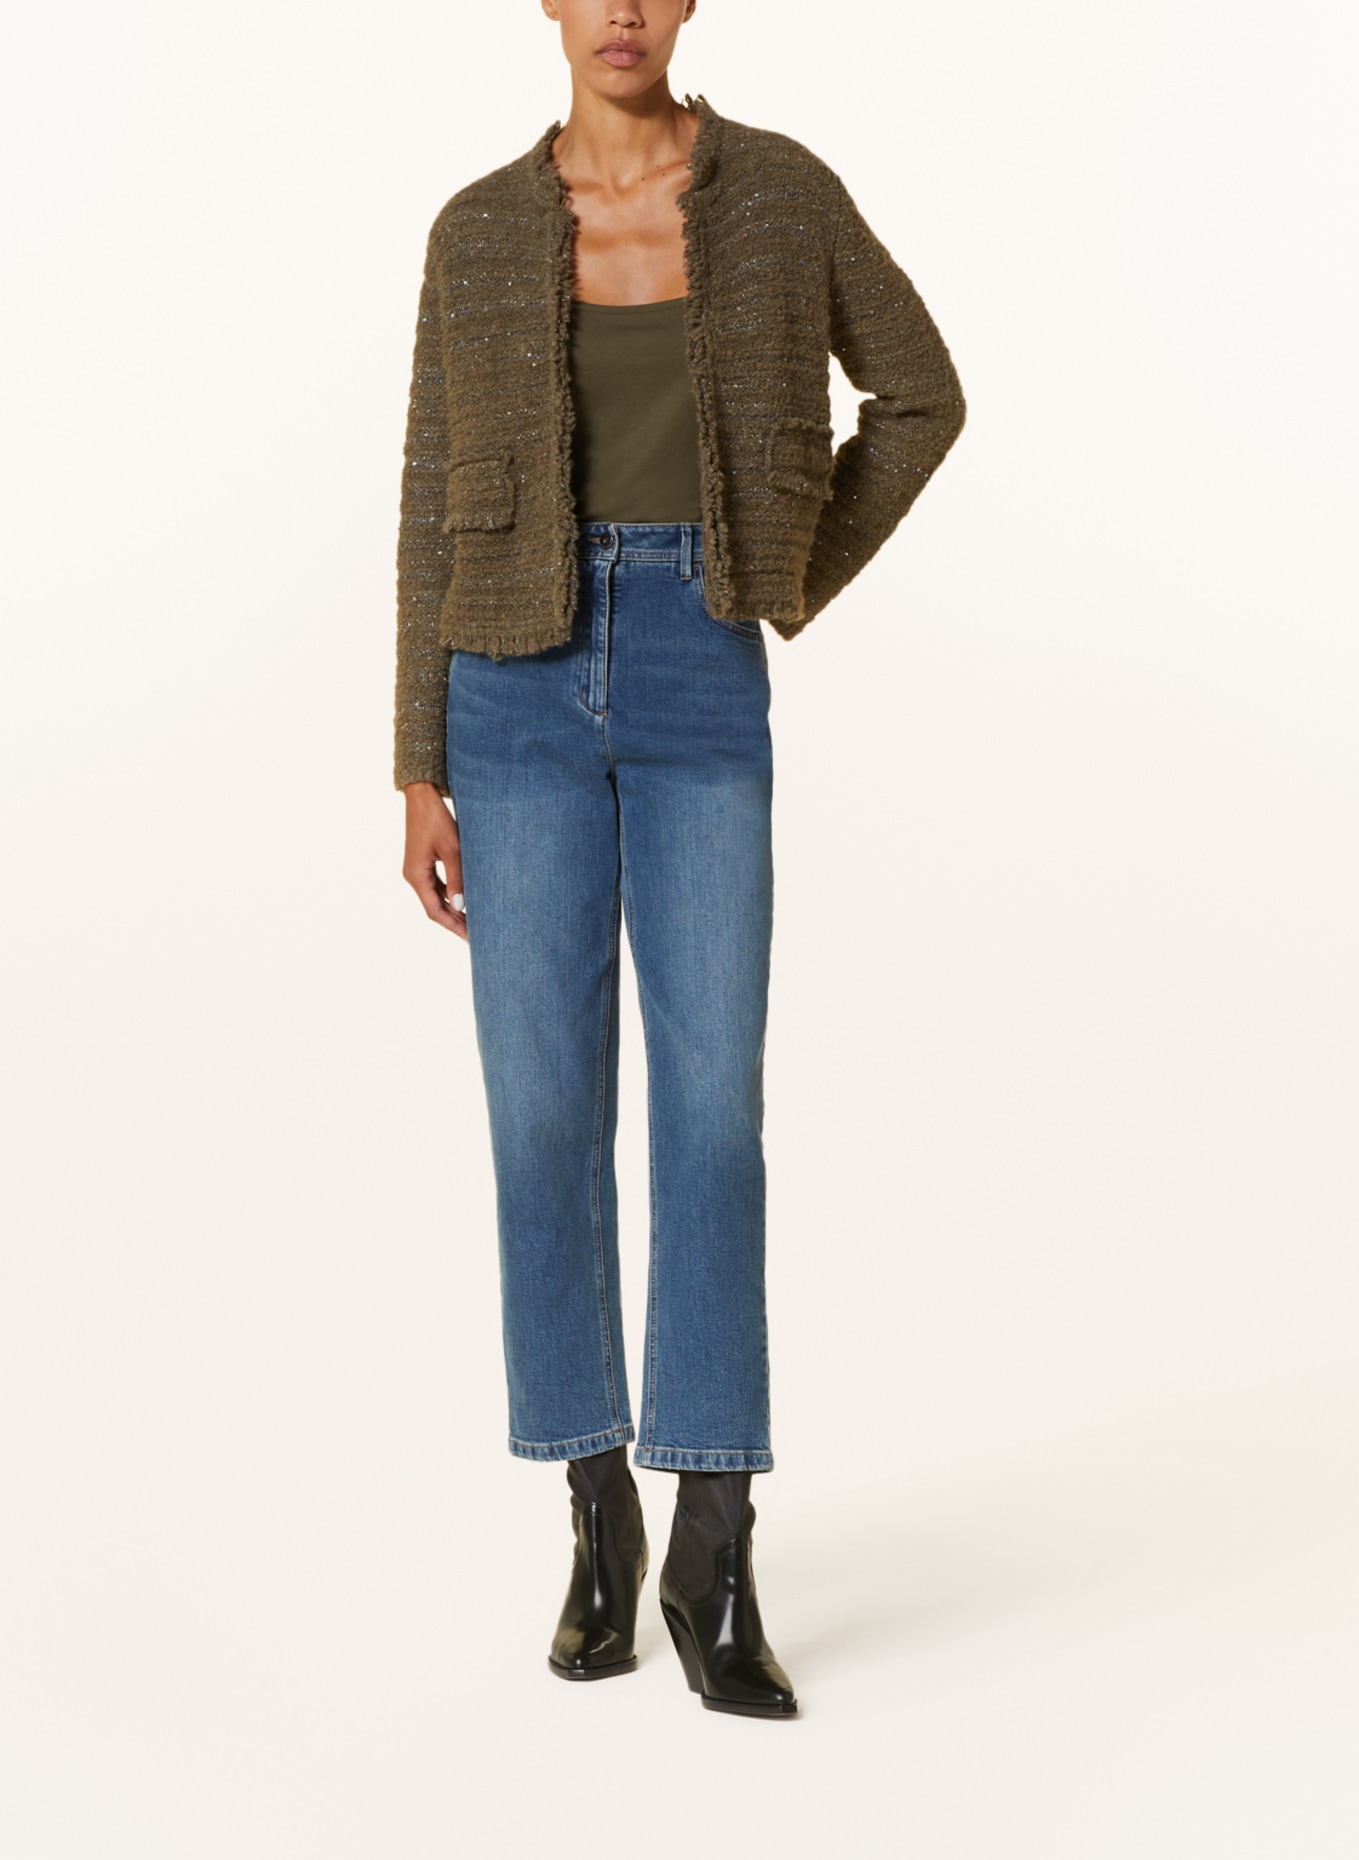 LUISA CERANO Knit cardigan with sequins, Color: KHAKI (Image 2)